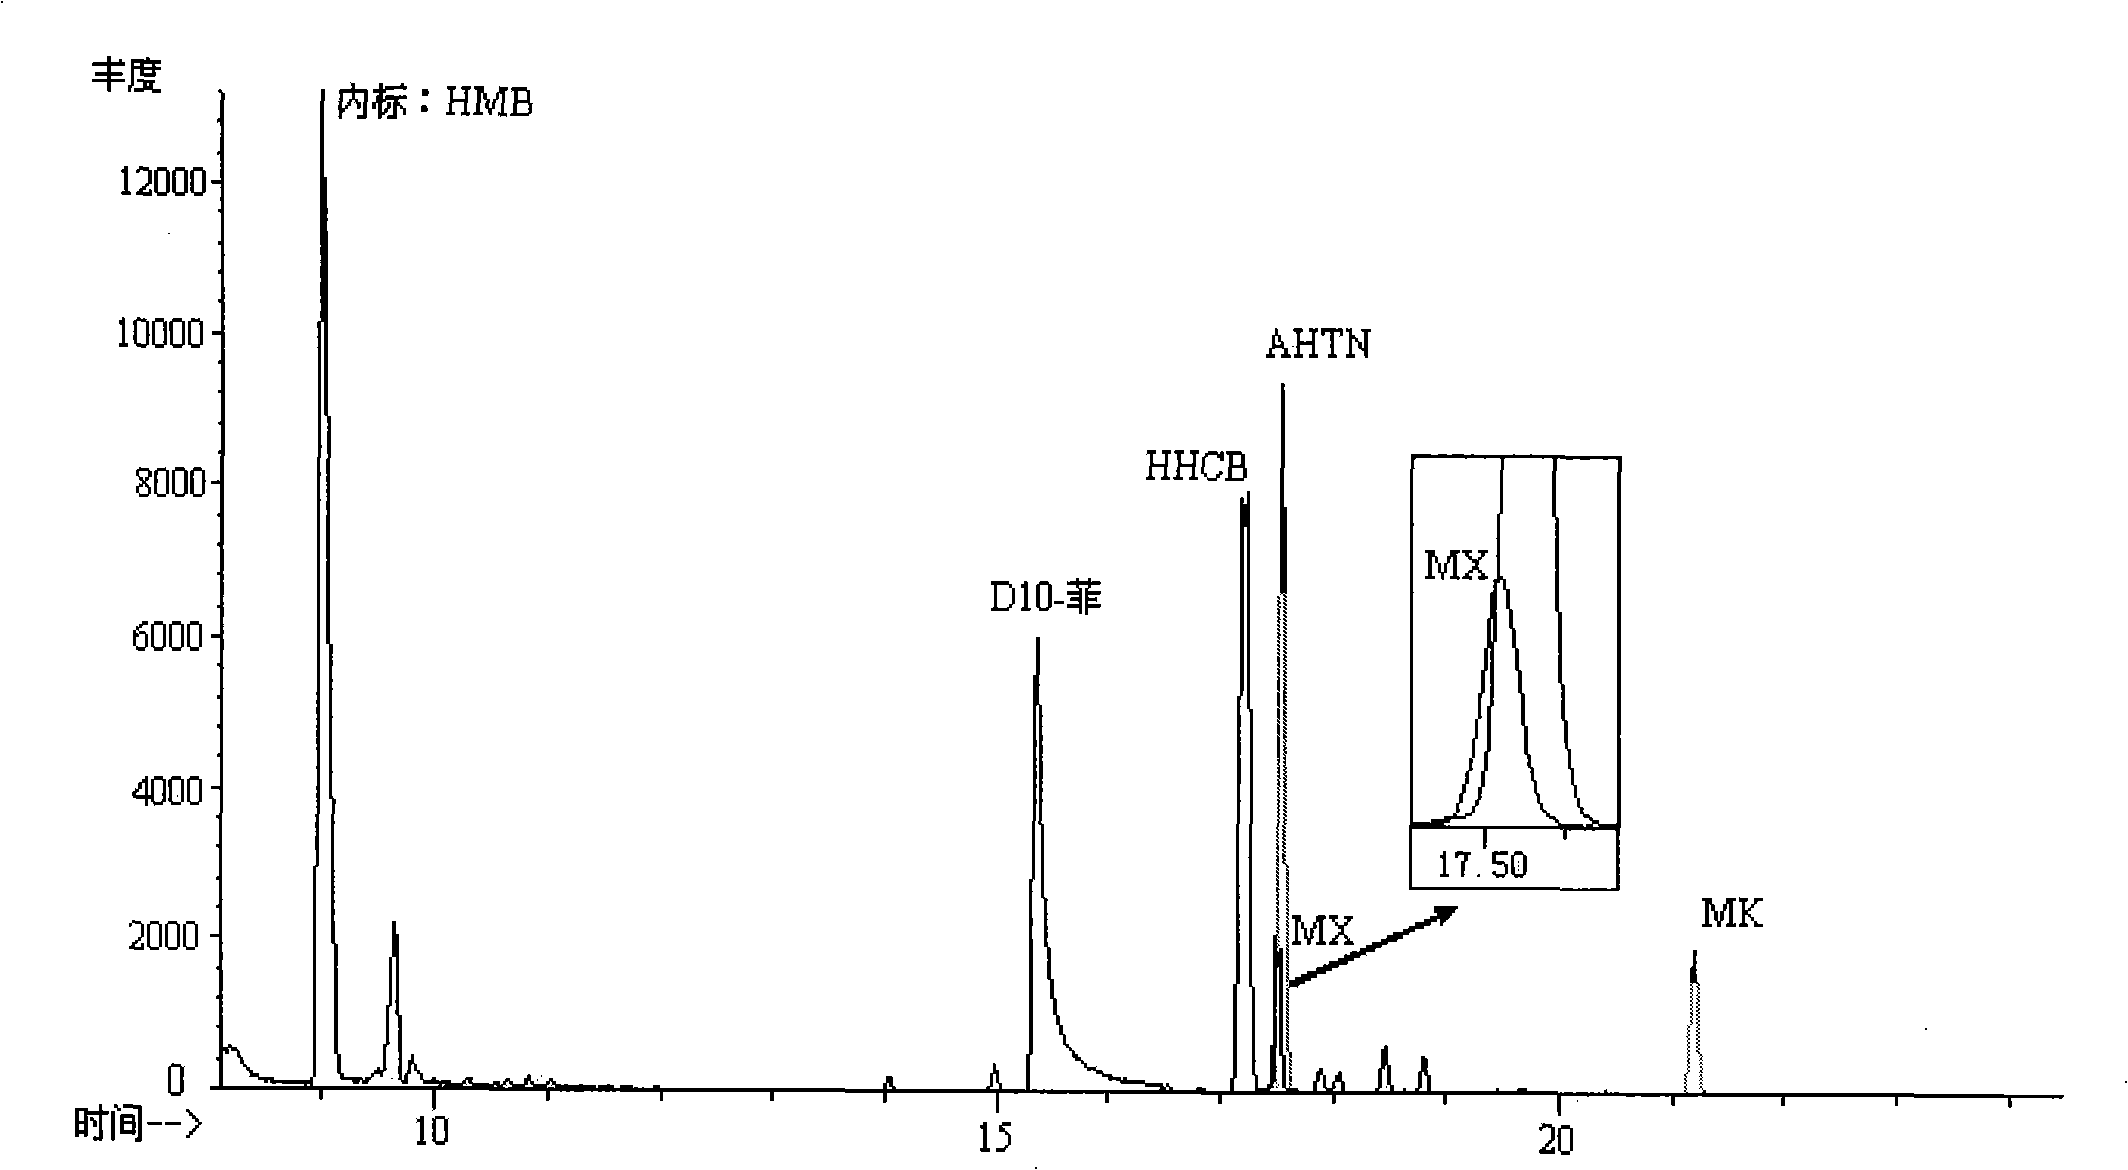 Method for determining synthetic musk concentration of breast milk